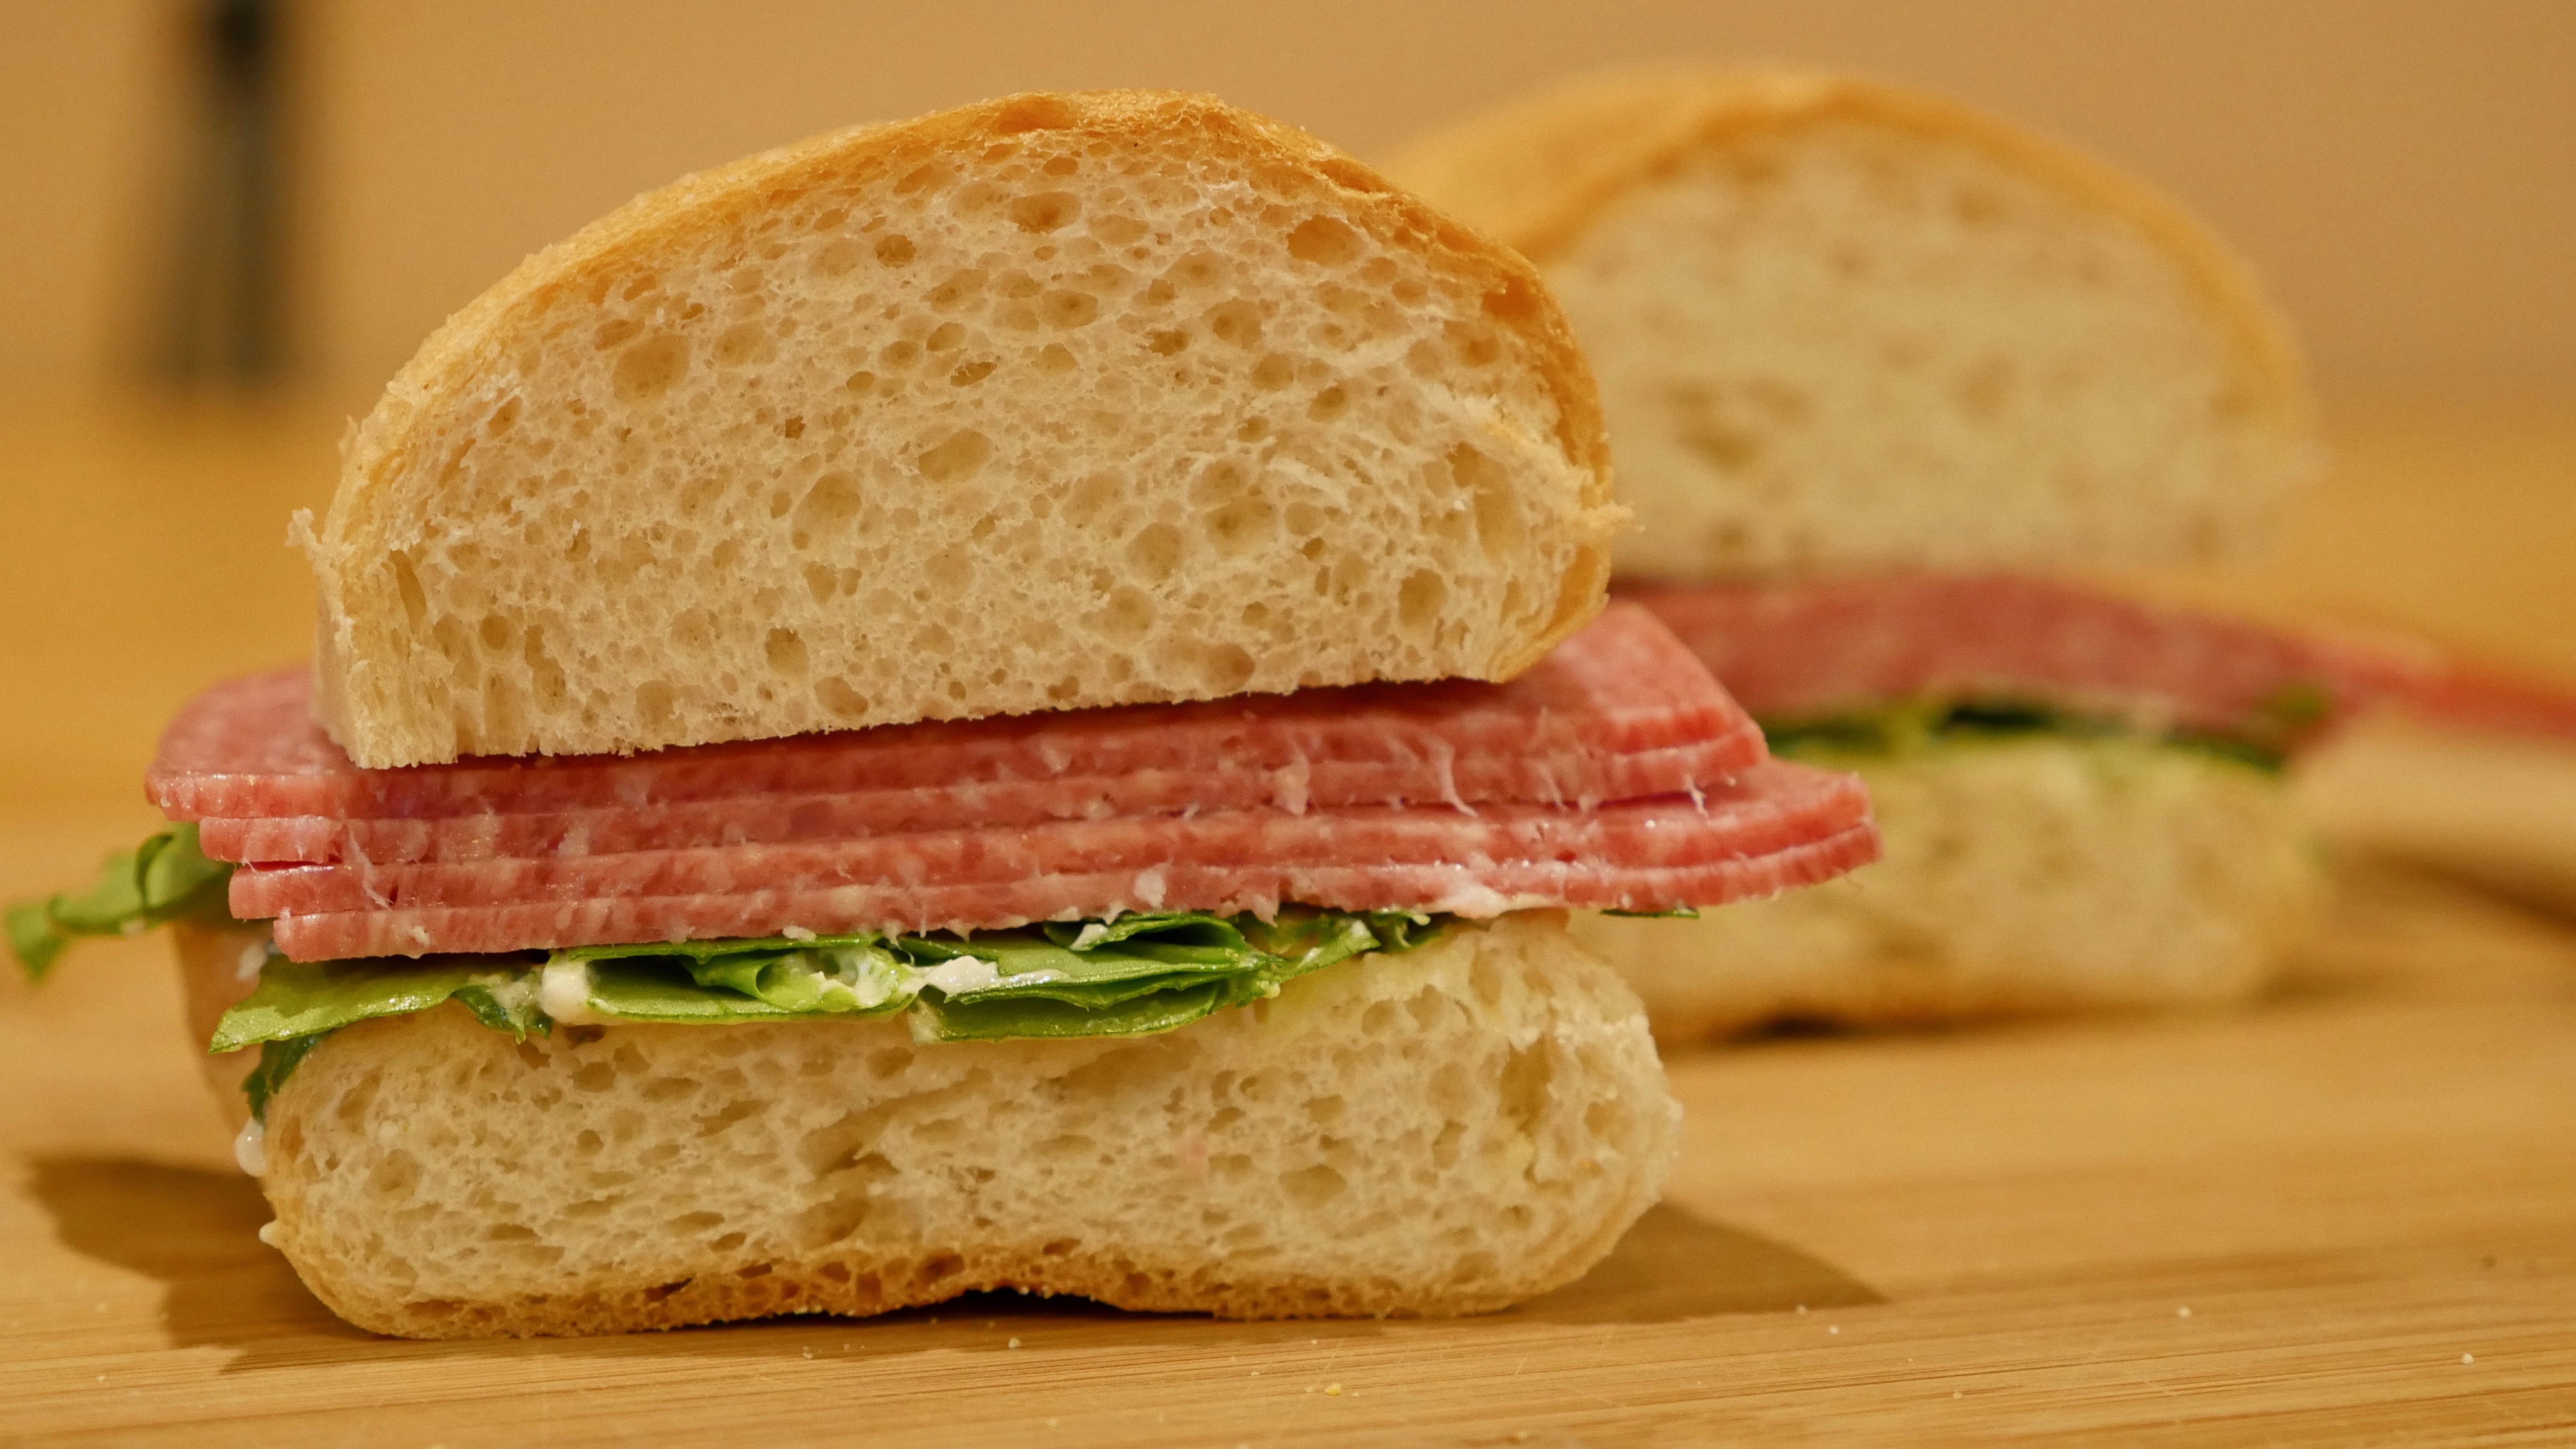 salami and cheese sandwich